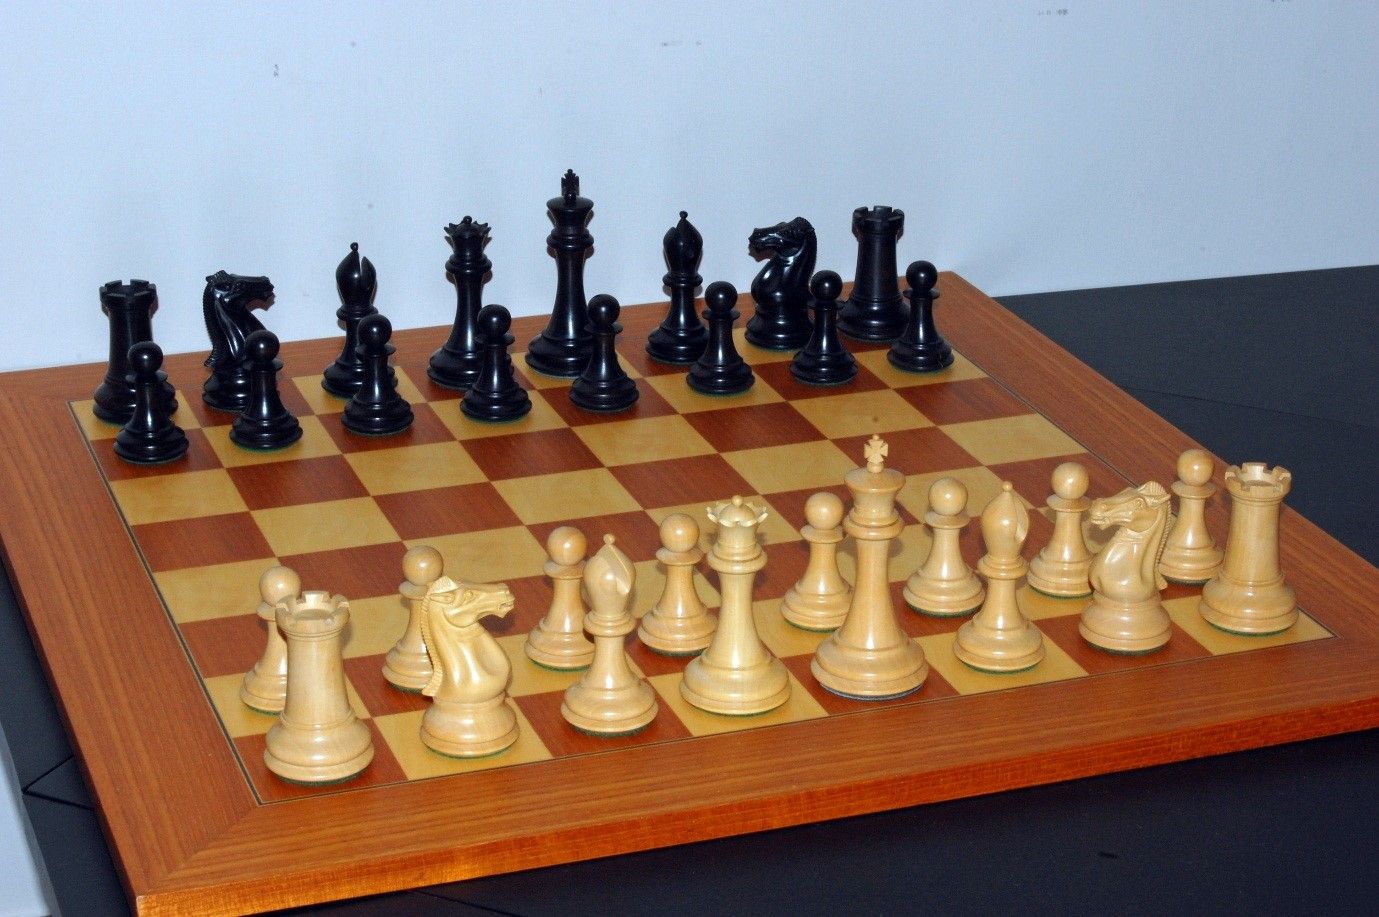 Who Invented The Game Of Chess?